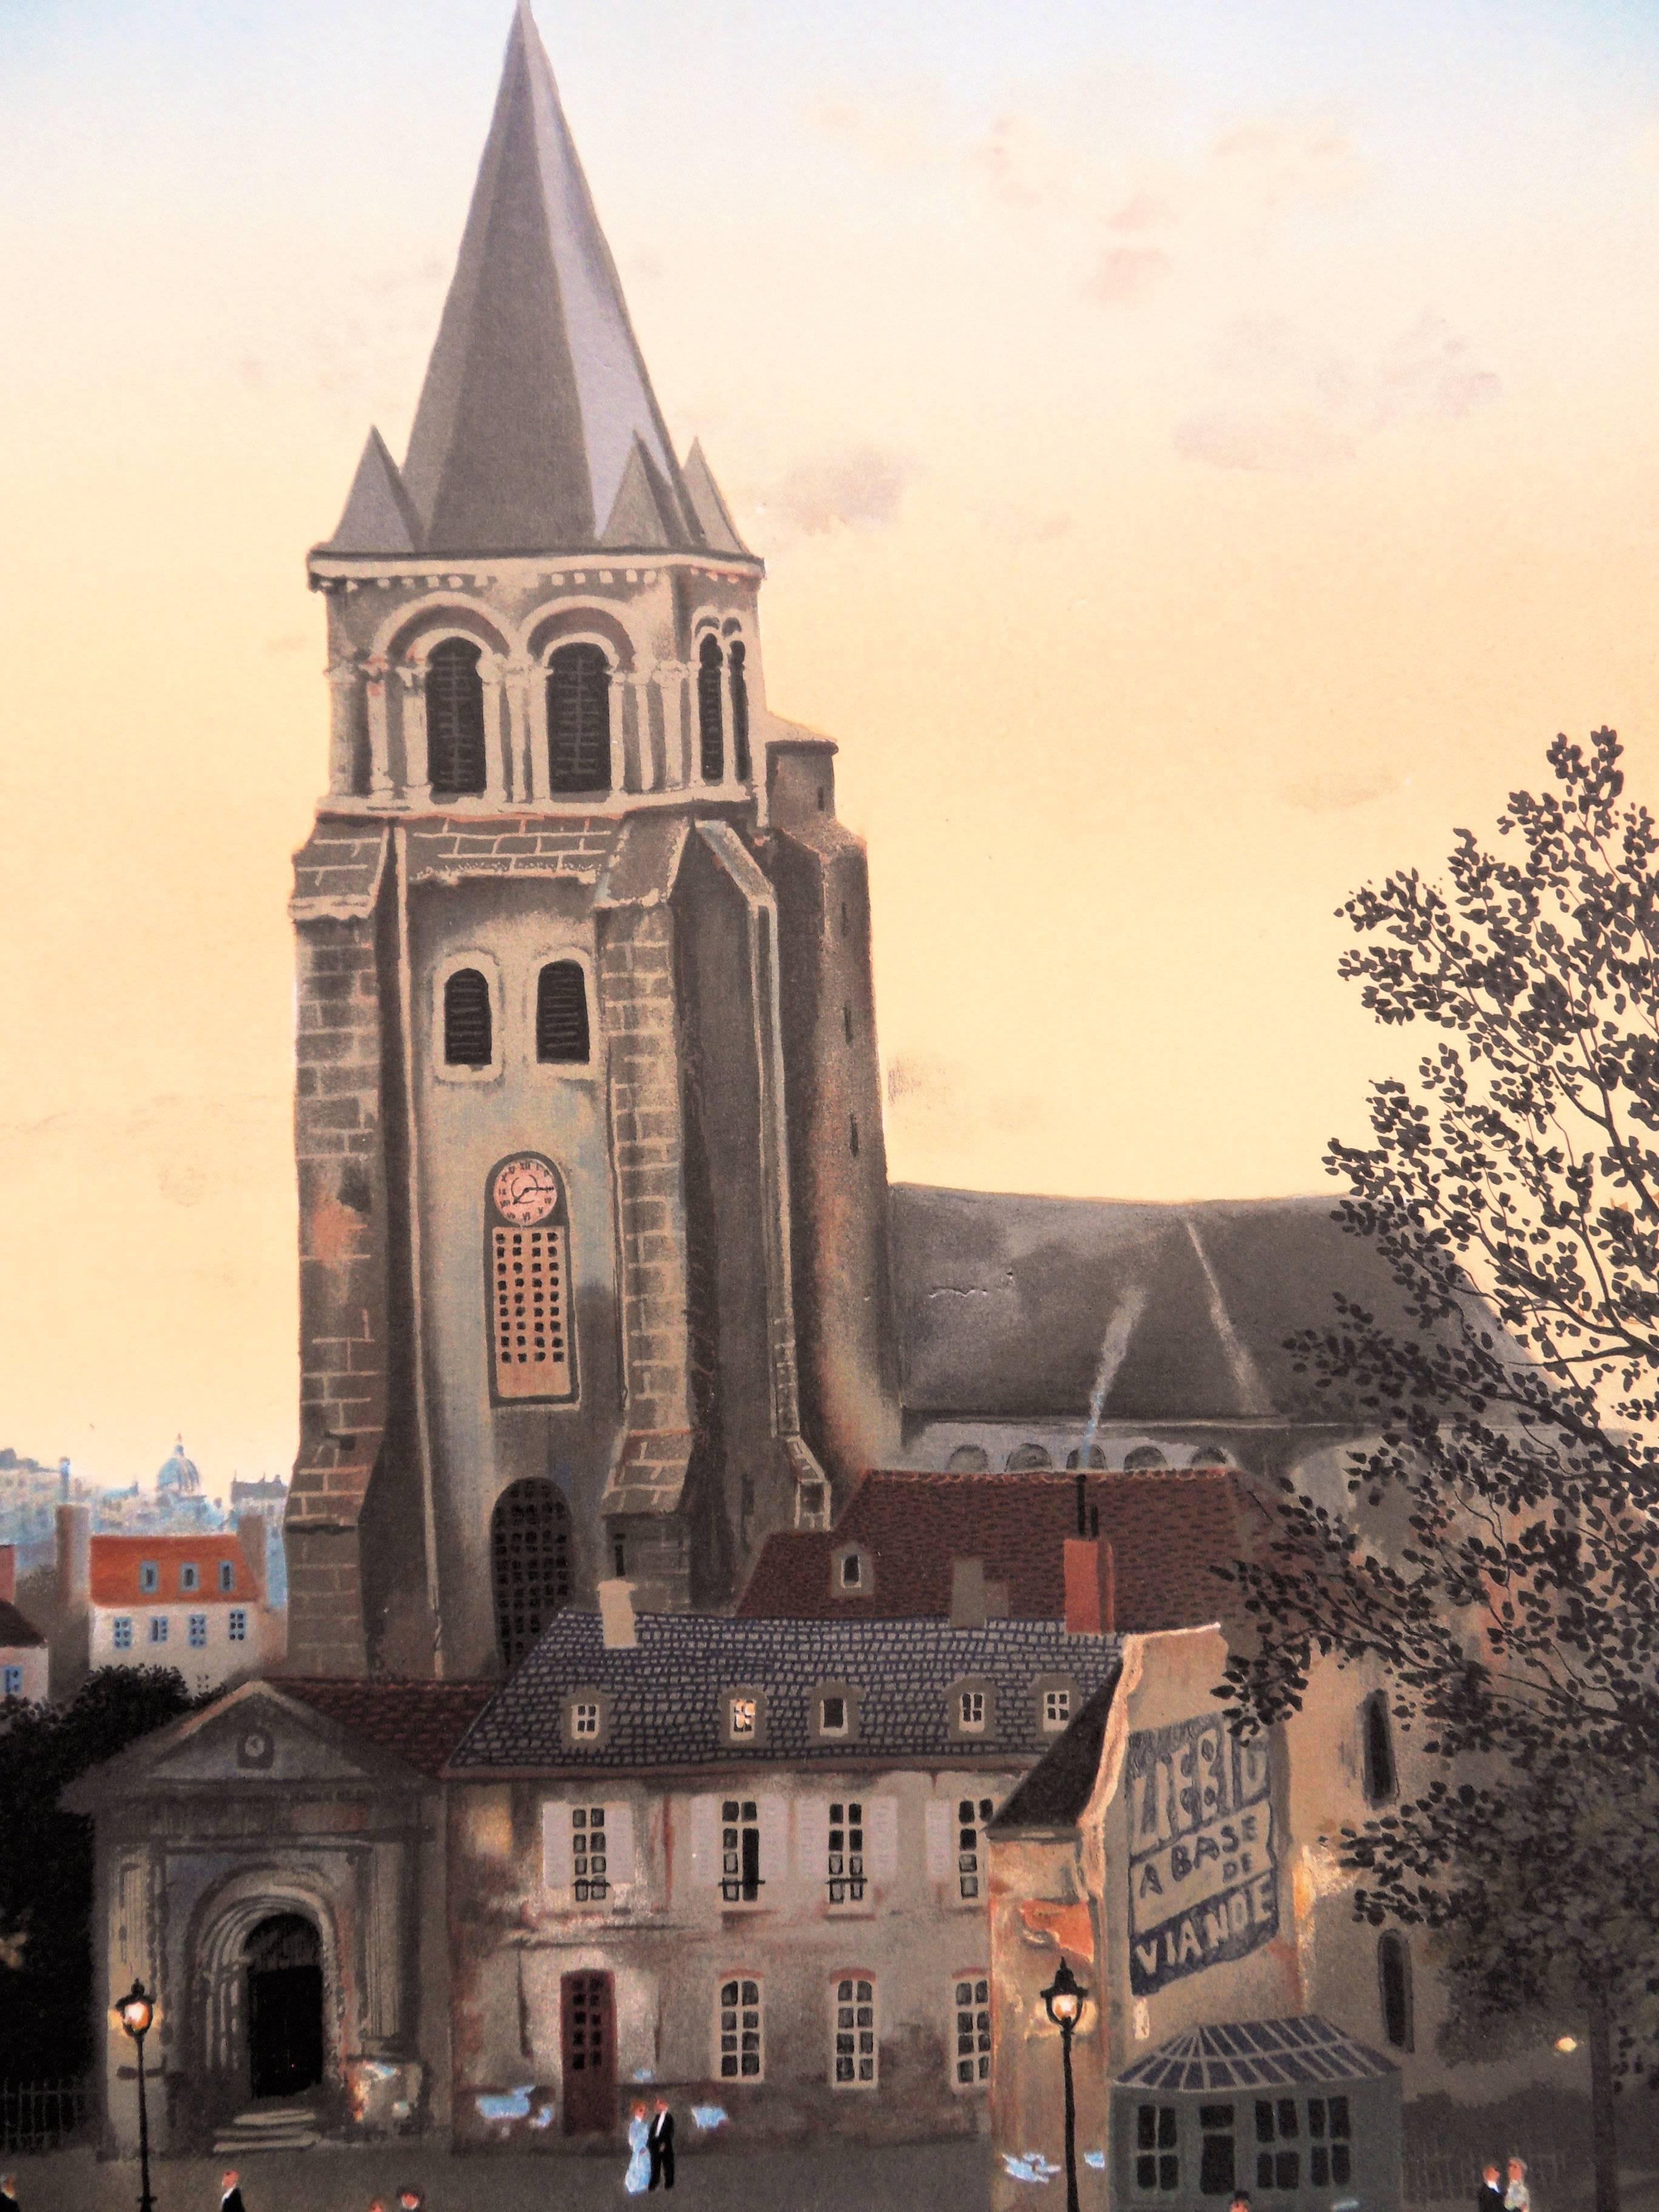 Michel DELACROIX
Paris : Saint Germain des Pres Church

Lithograph
Printed signature in the plate
On wove paper 85 x 60 cm (c. 34 x 24 inch)
Lithographic poster for the artist personal exhibition at Atelier Gallery in 1982. The edition was limited